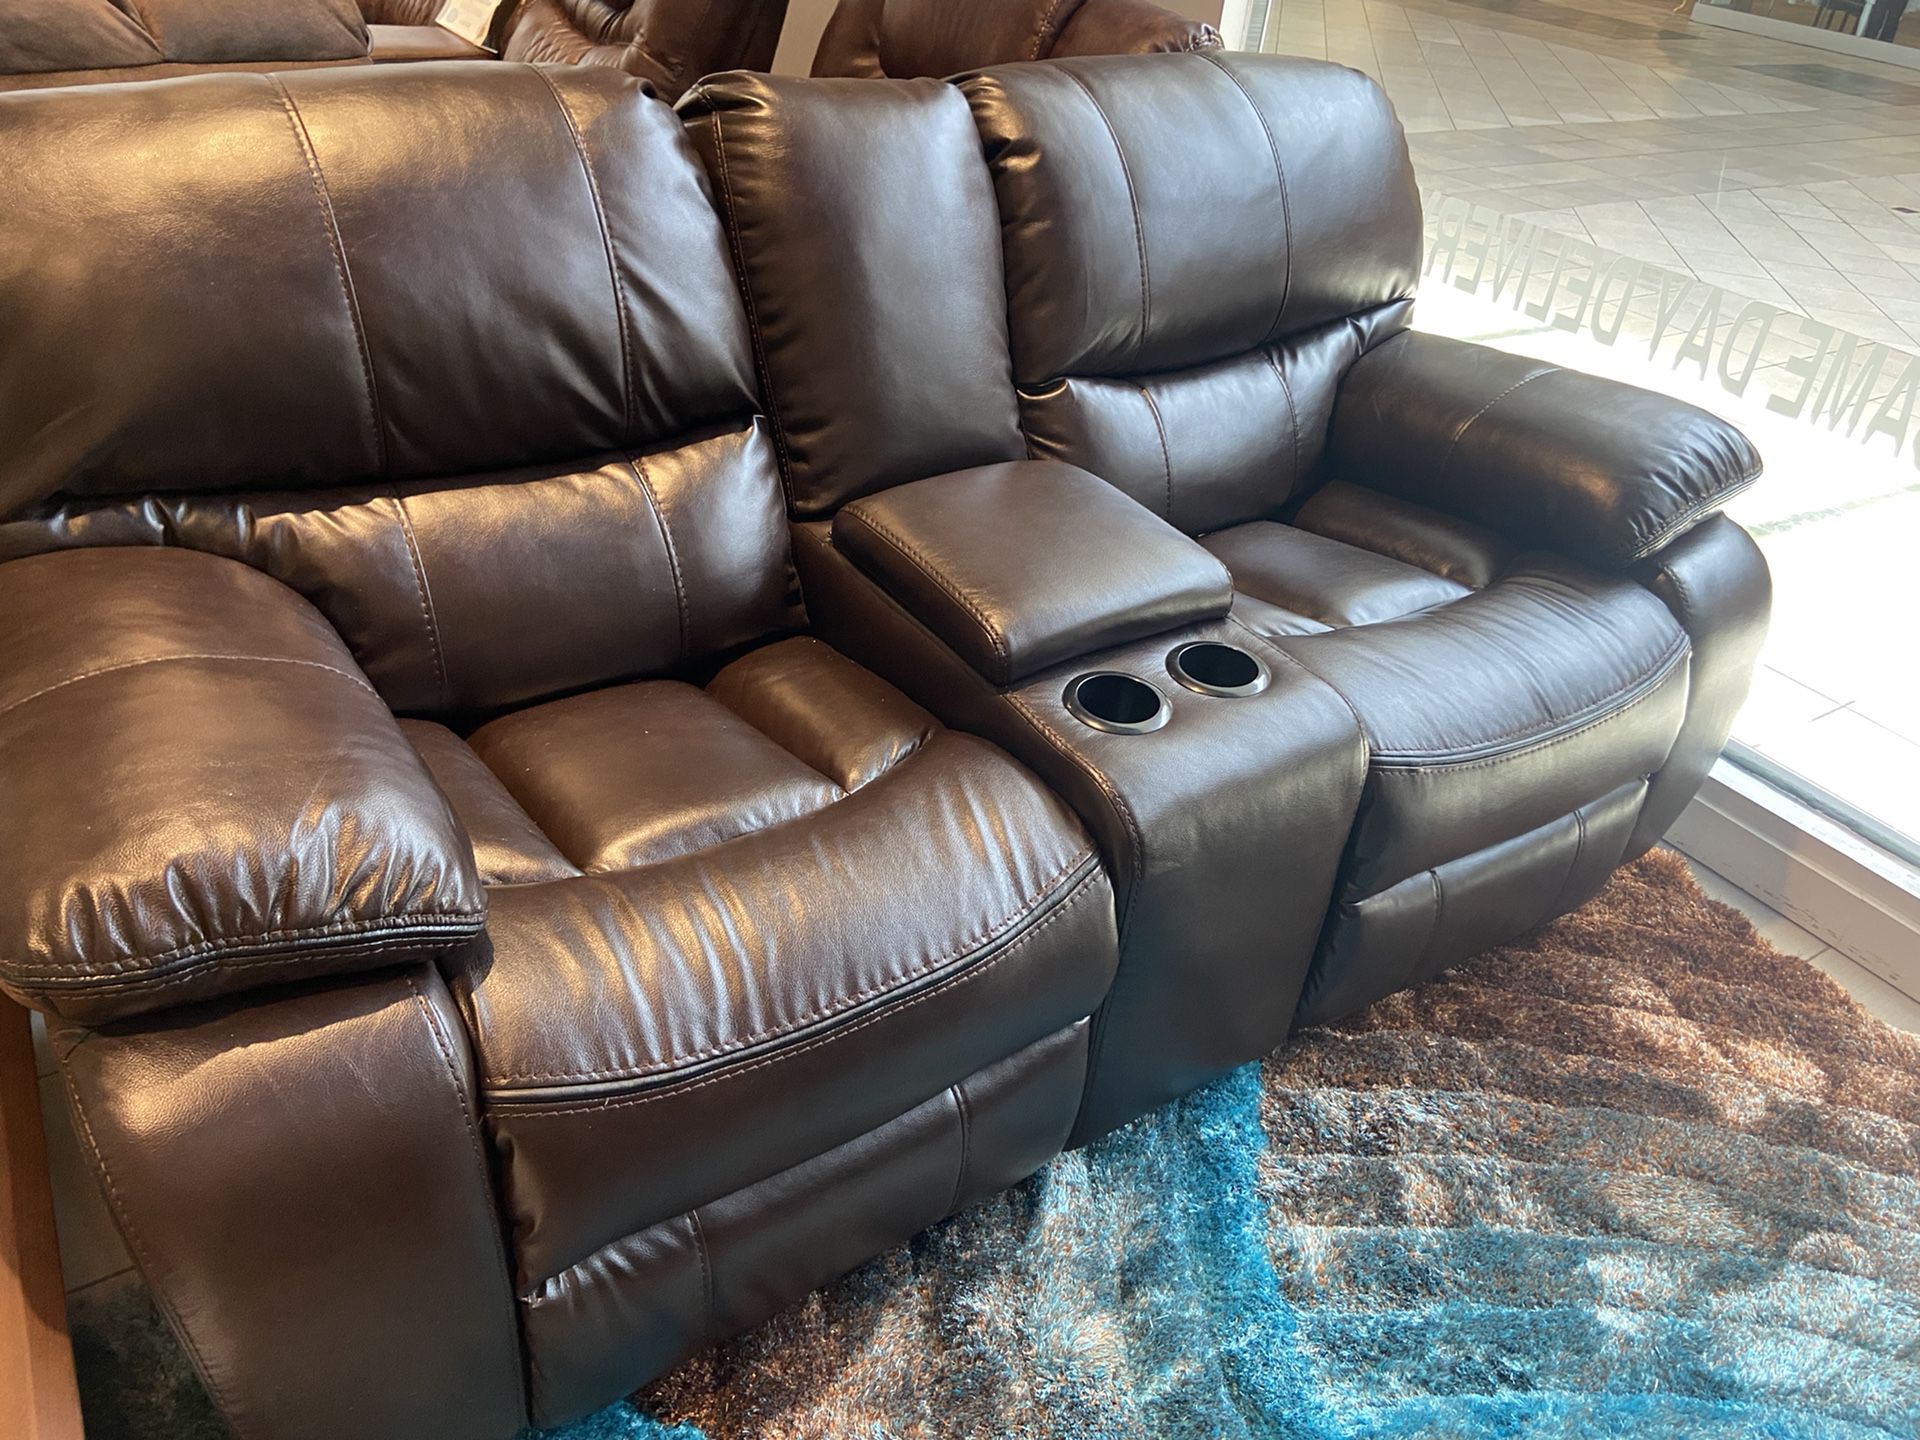 SOFA AND LOVESEAT RECLINING FOR COMBOS. $999!! 6 COLORS FABRICS TO CHOOSE FROM! DELIVERY TODAY! NO CREDIT NEEDED! 